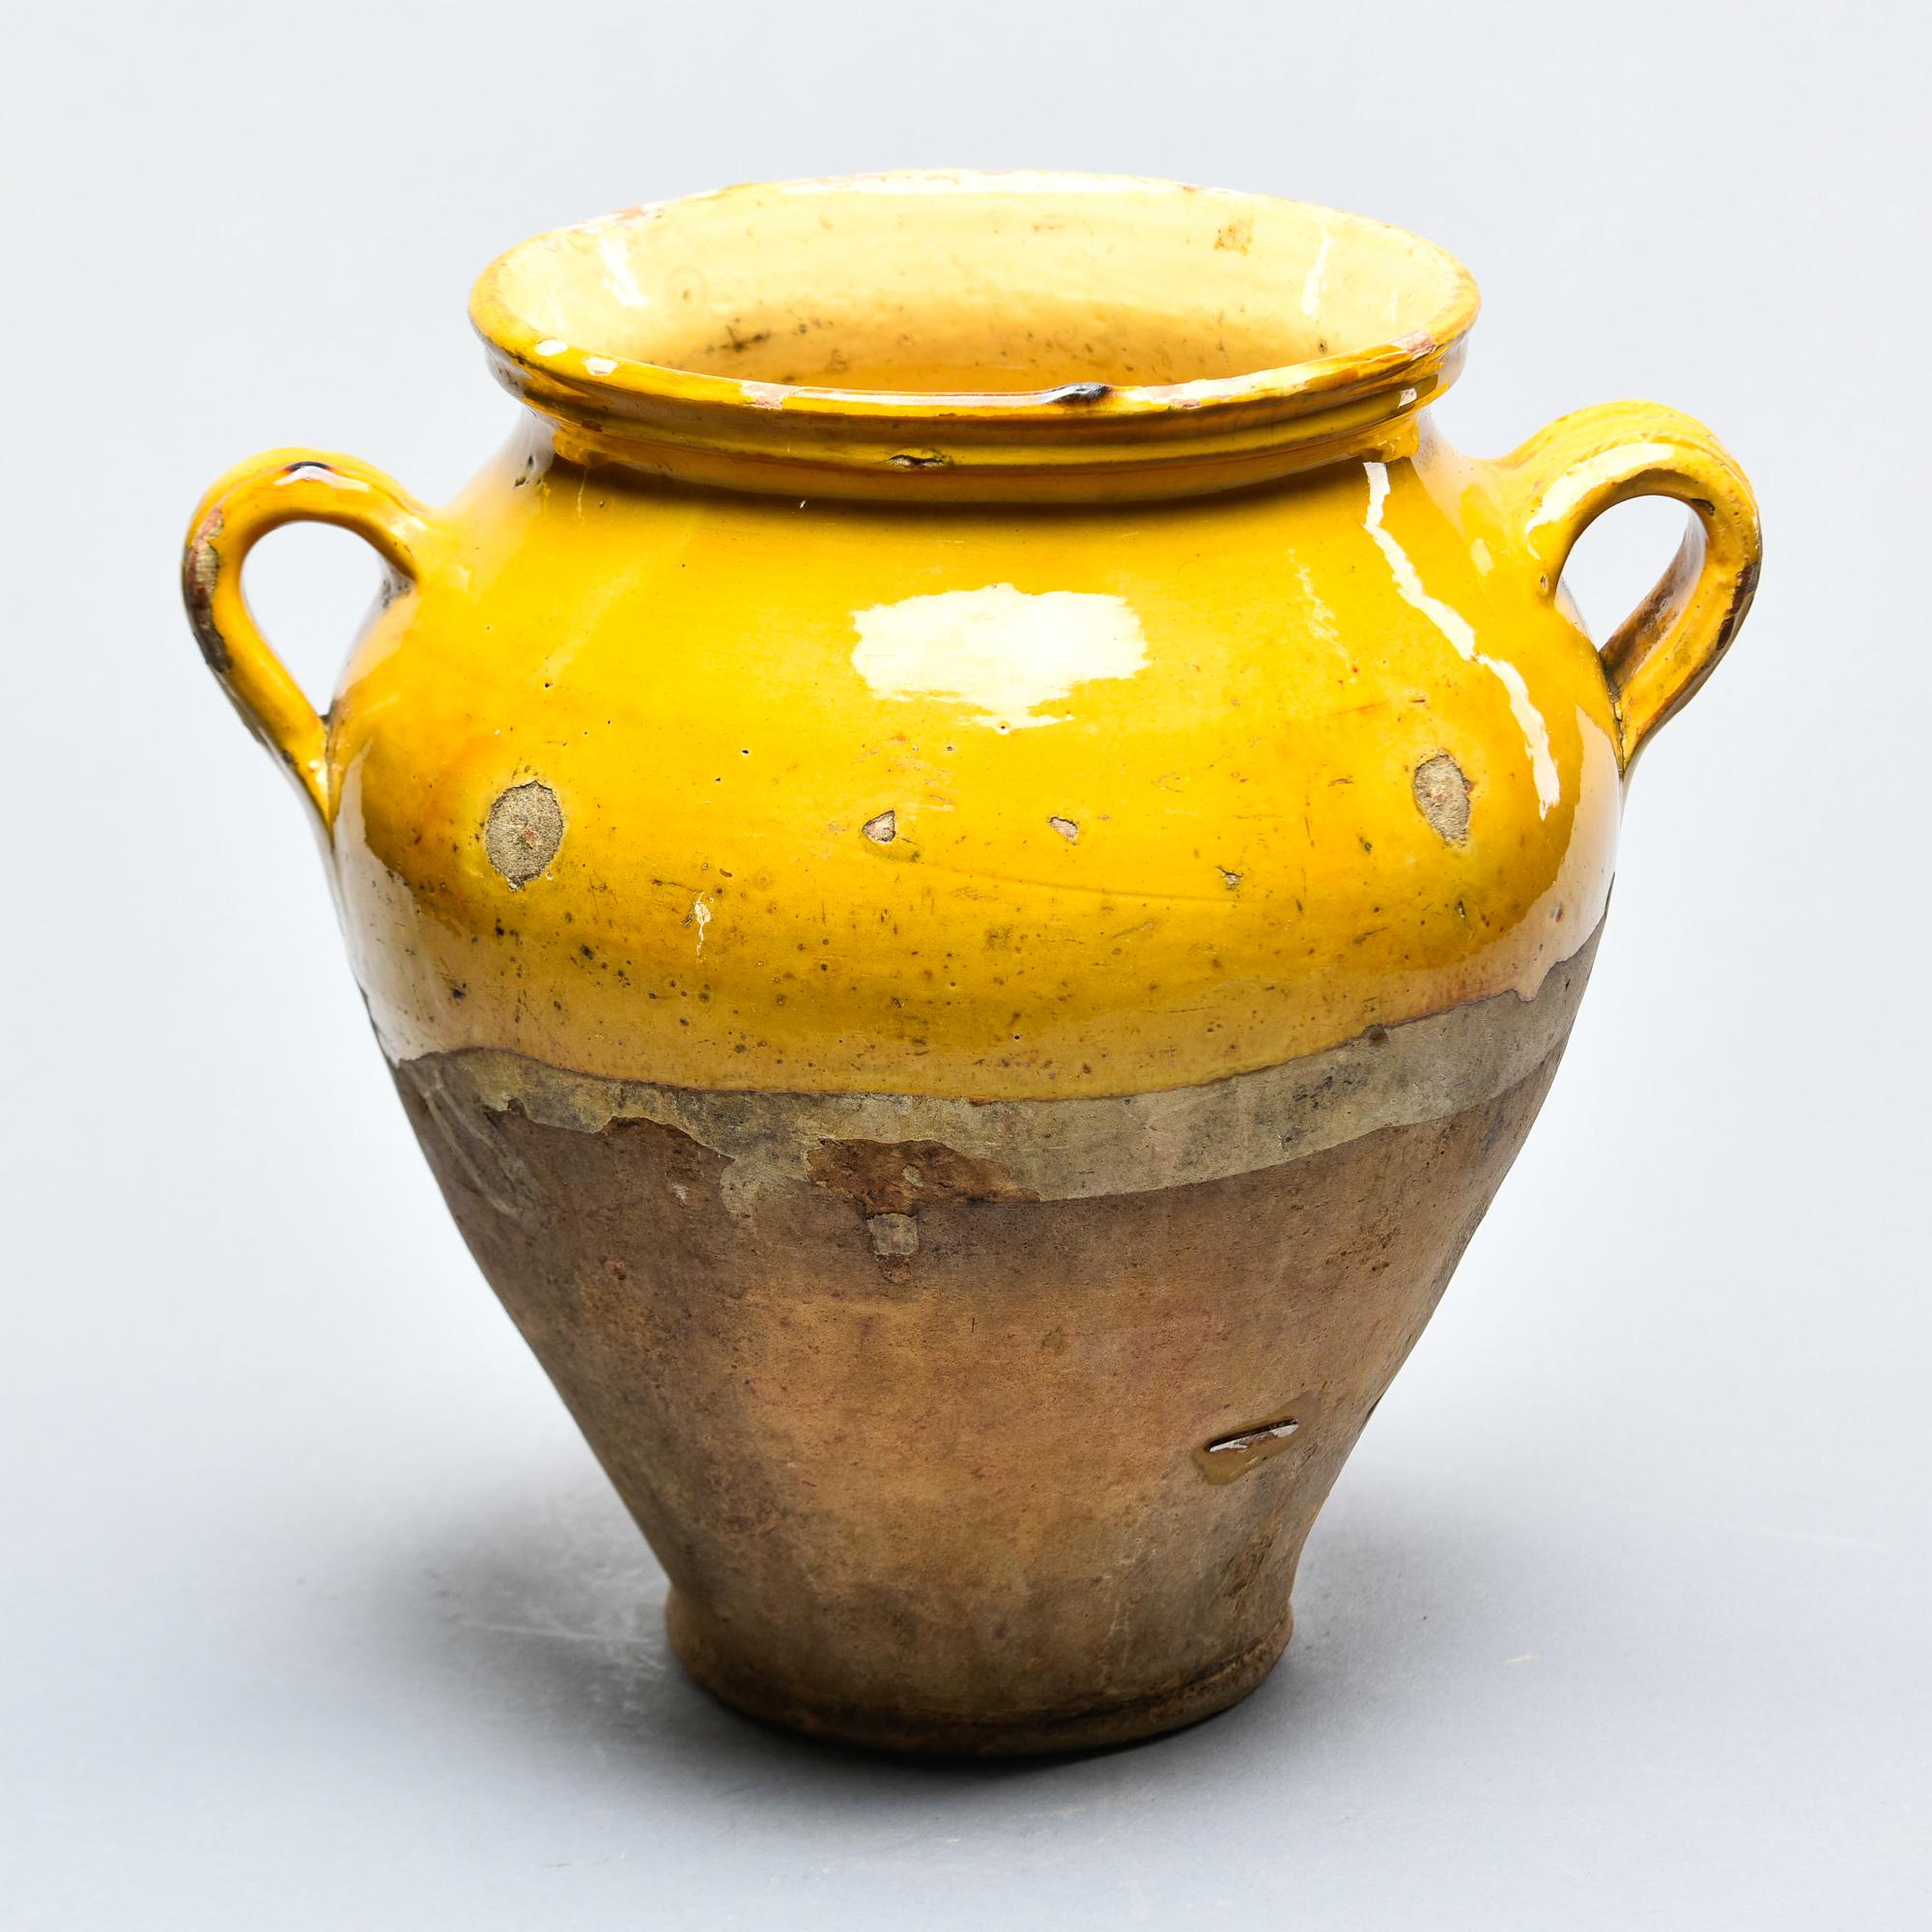 Found in France, this French confit jar dates from approximately 1910. This piece stands 10” high and has the traditional form with a wide vessel body and two handles on the sides with a mustard-colored glaze on the outside top half and fully glazed